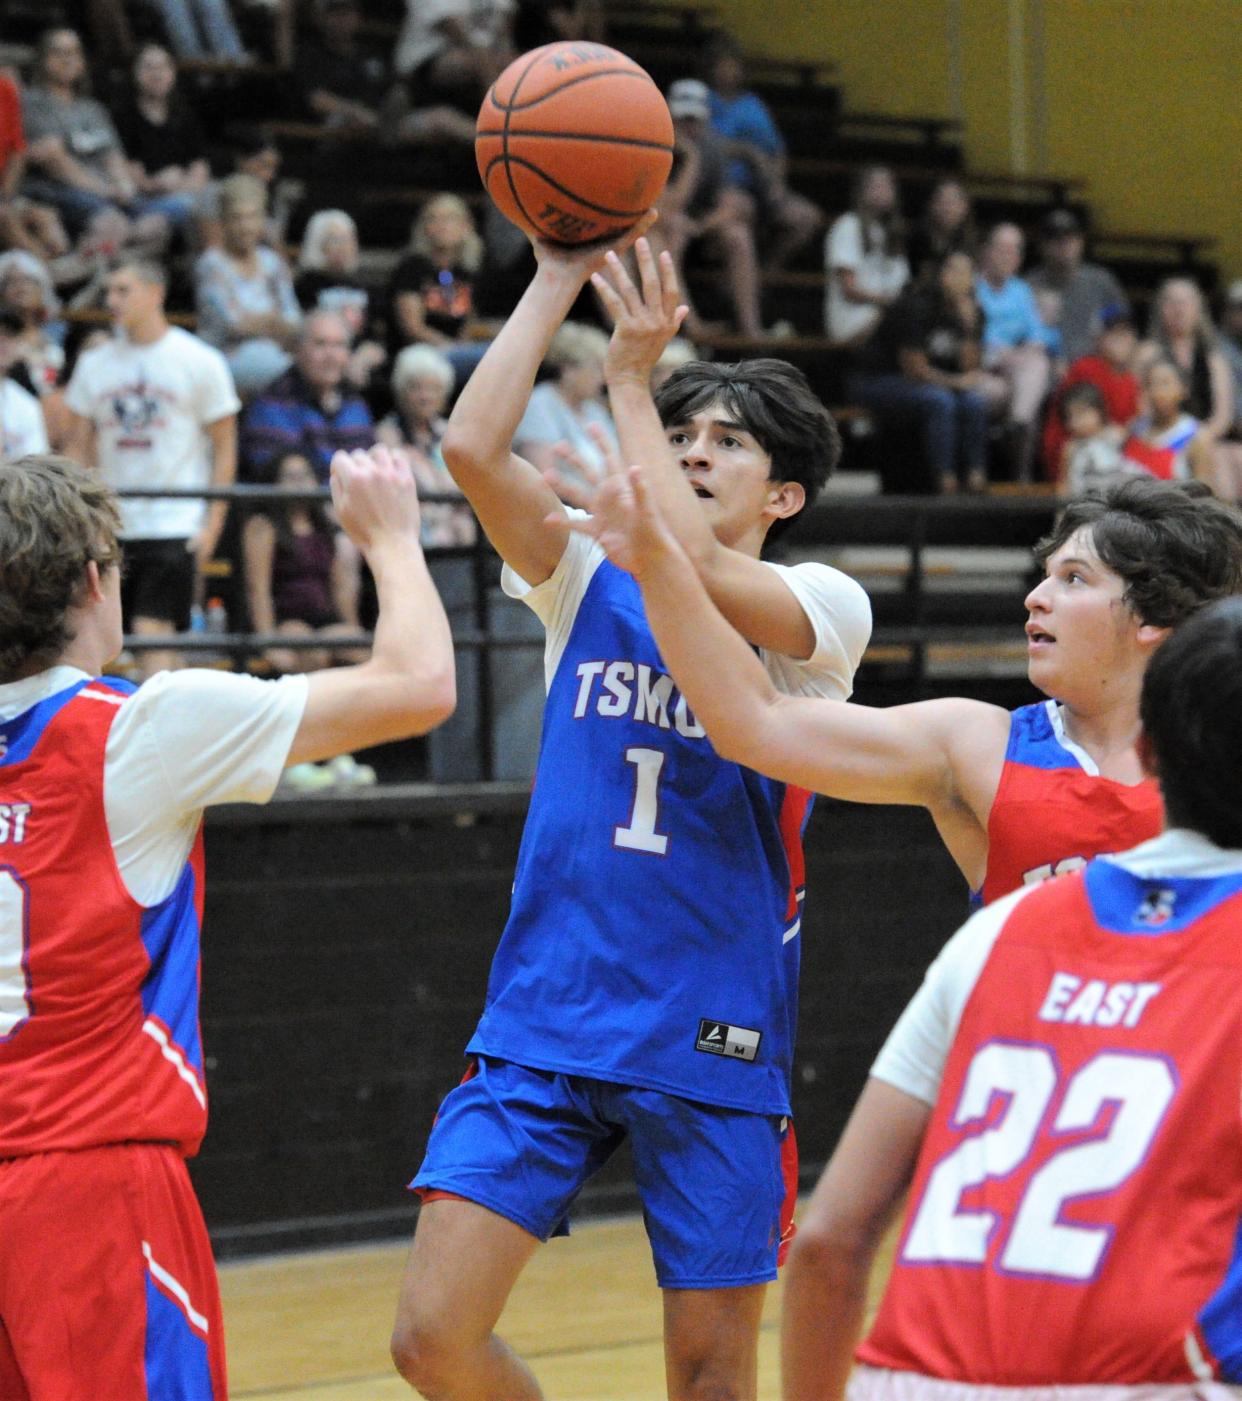 Springlake-Earth's Evan DeLeon shoots the ball during the Six Man Coaches Association Boys All-Star game at Rider on Saturday, July 16, 2022.